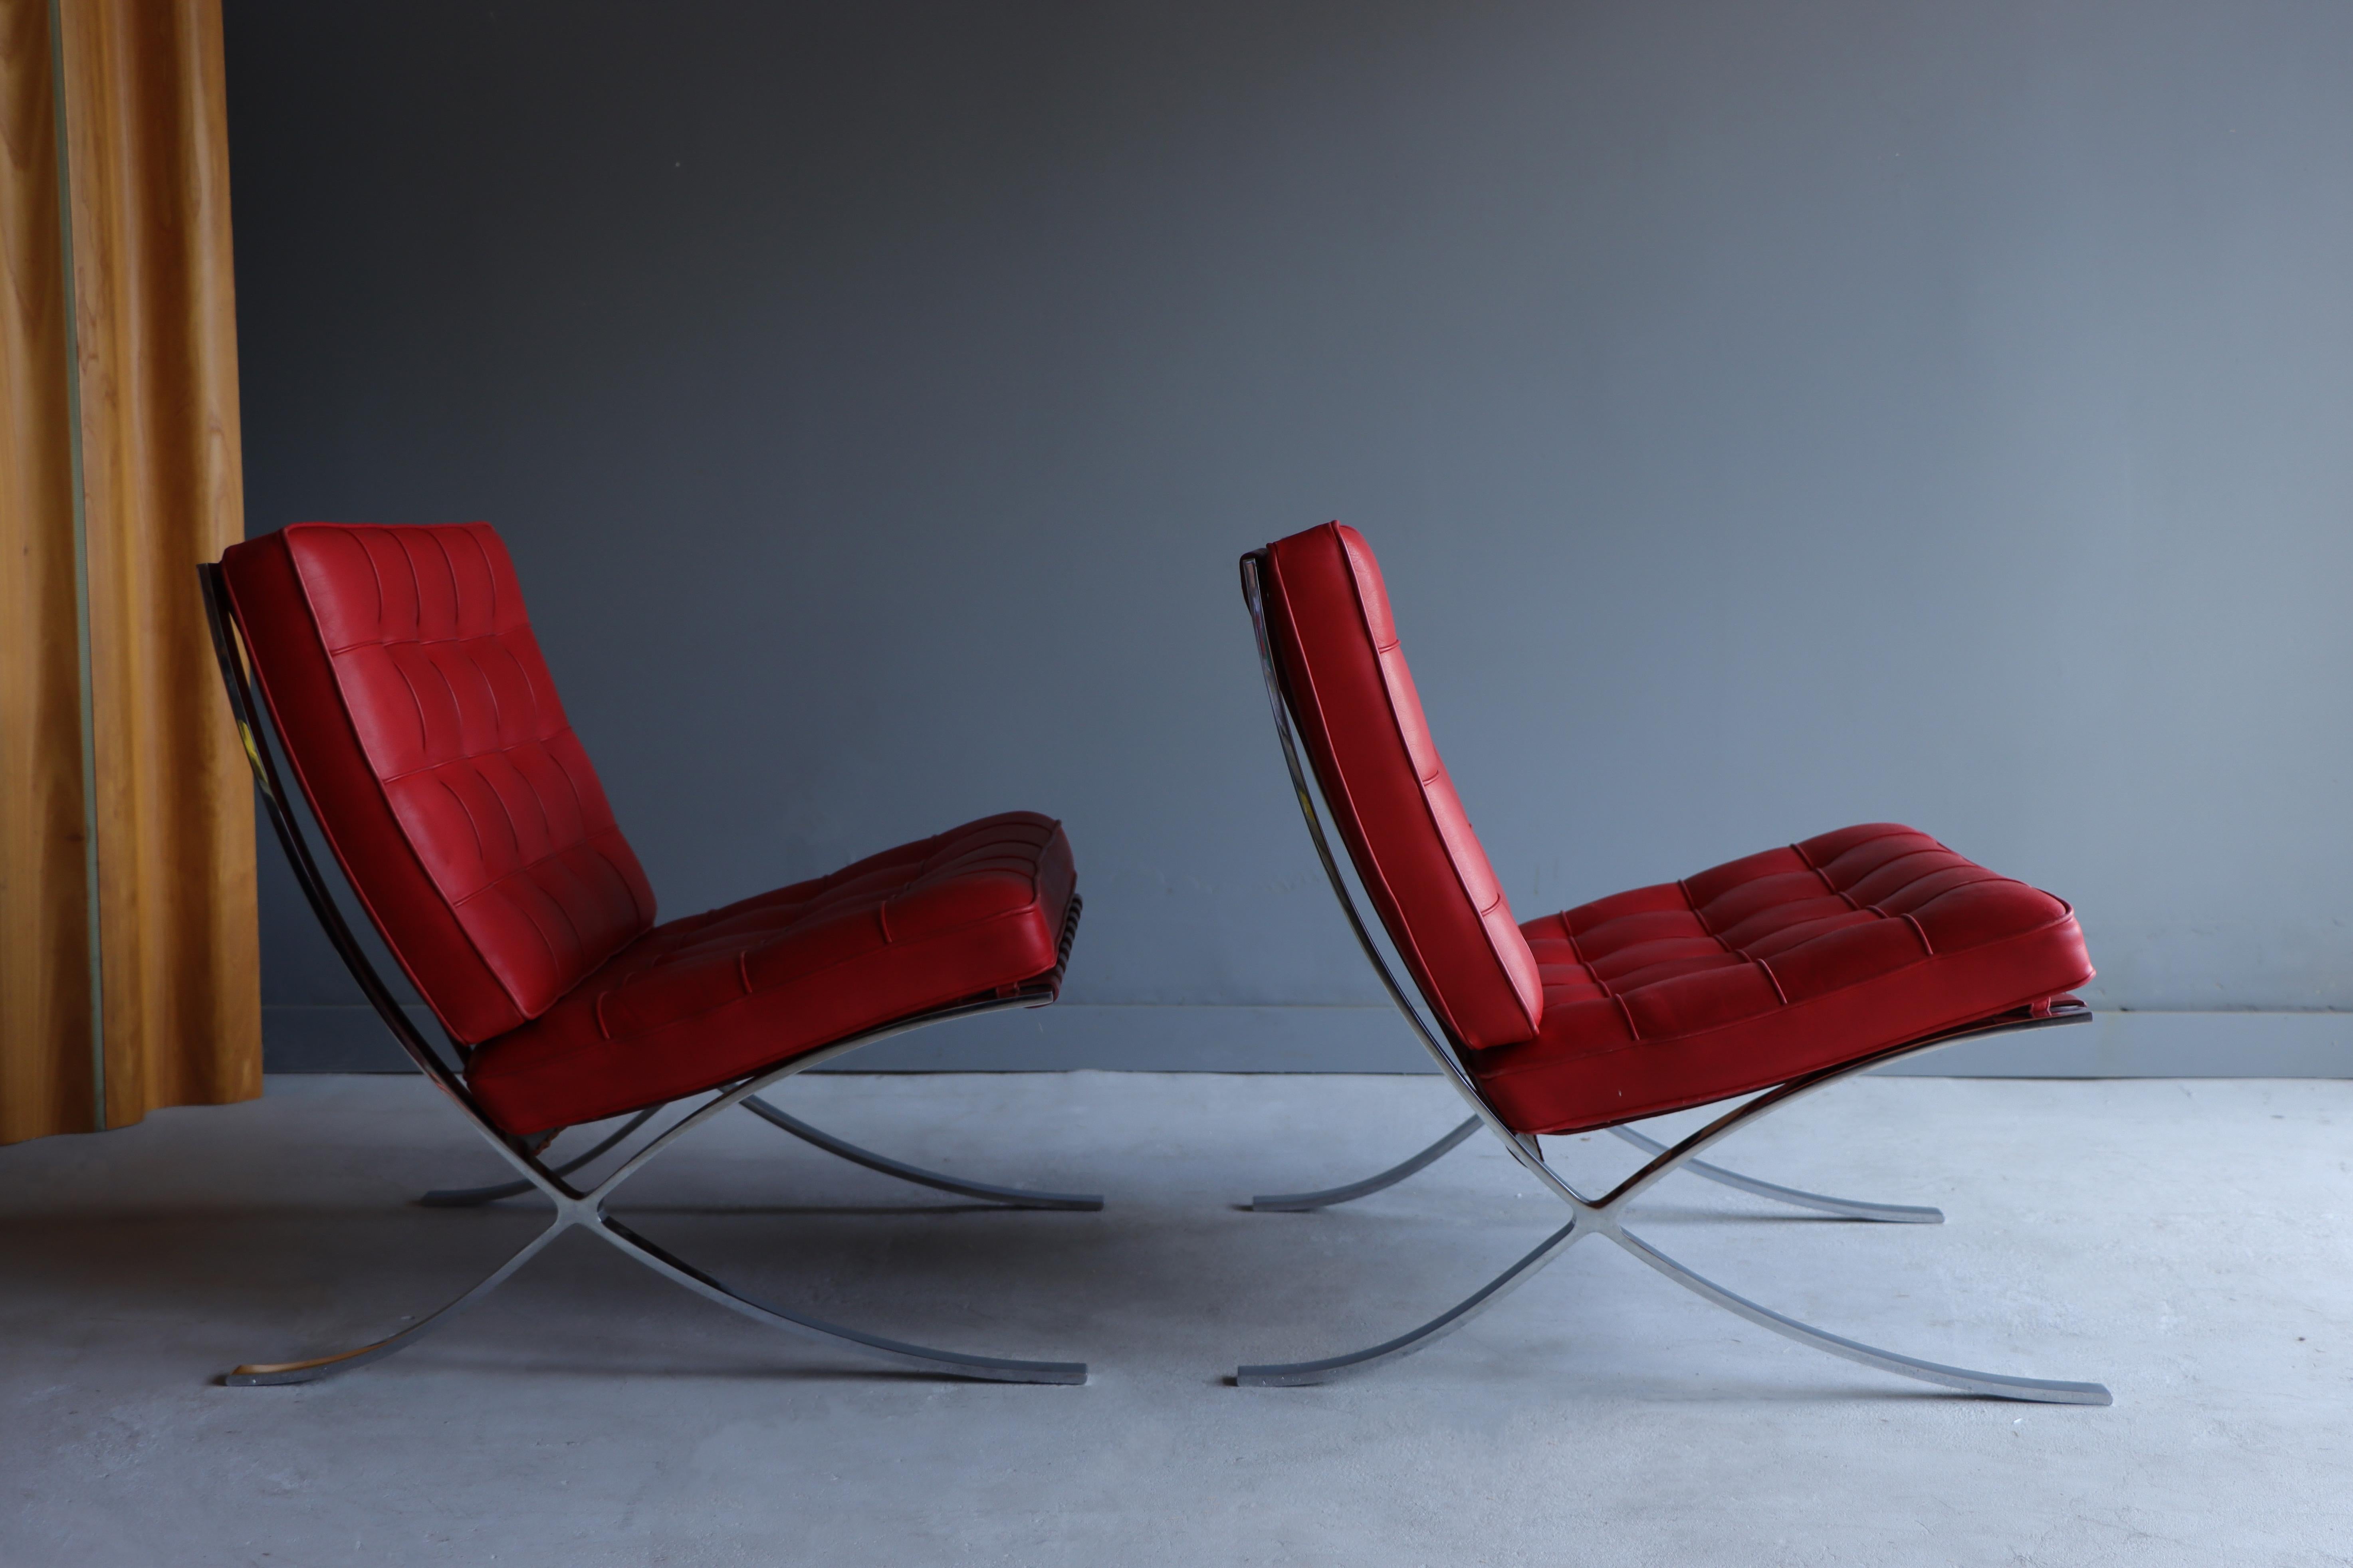 Hand-Crafted Pair of Fully labeled Barcelona Chairs by L. Mies Van Der Rohe for Knoll